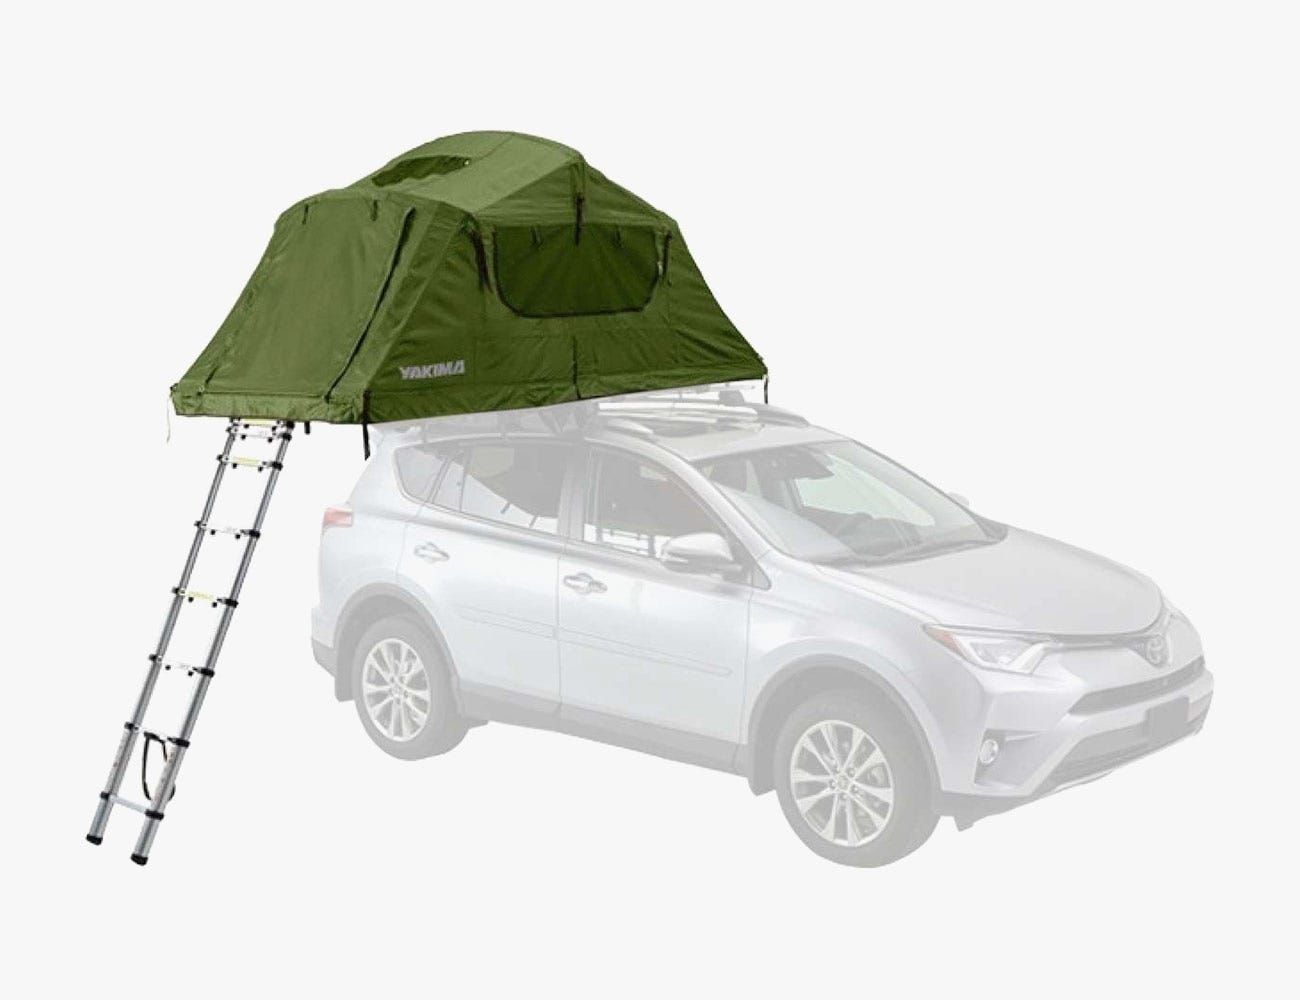 The Best Rooftop Tents You Buy: Roofnest, Yakima and More